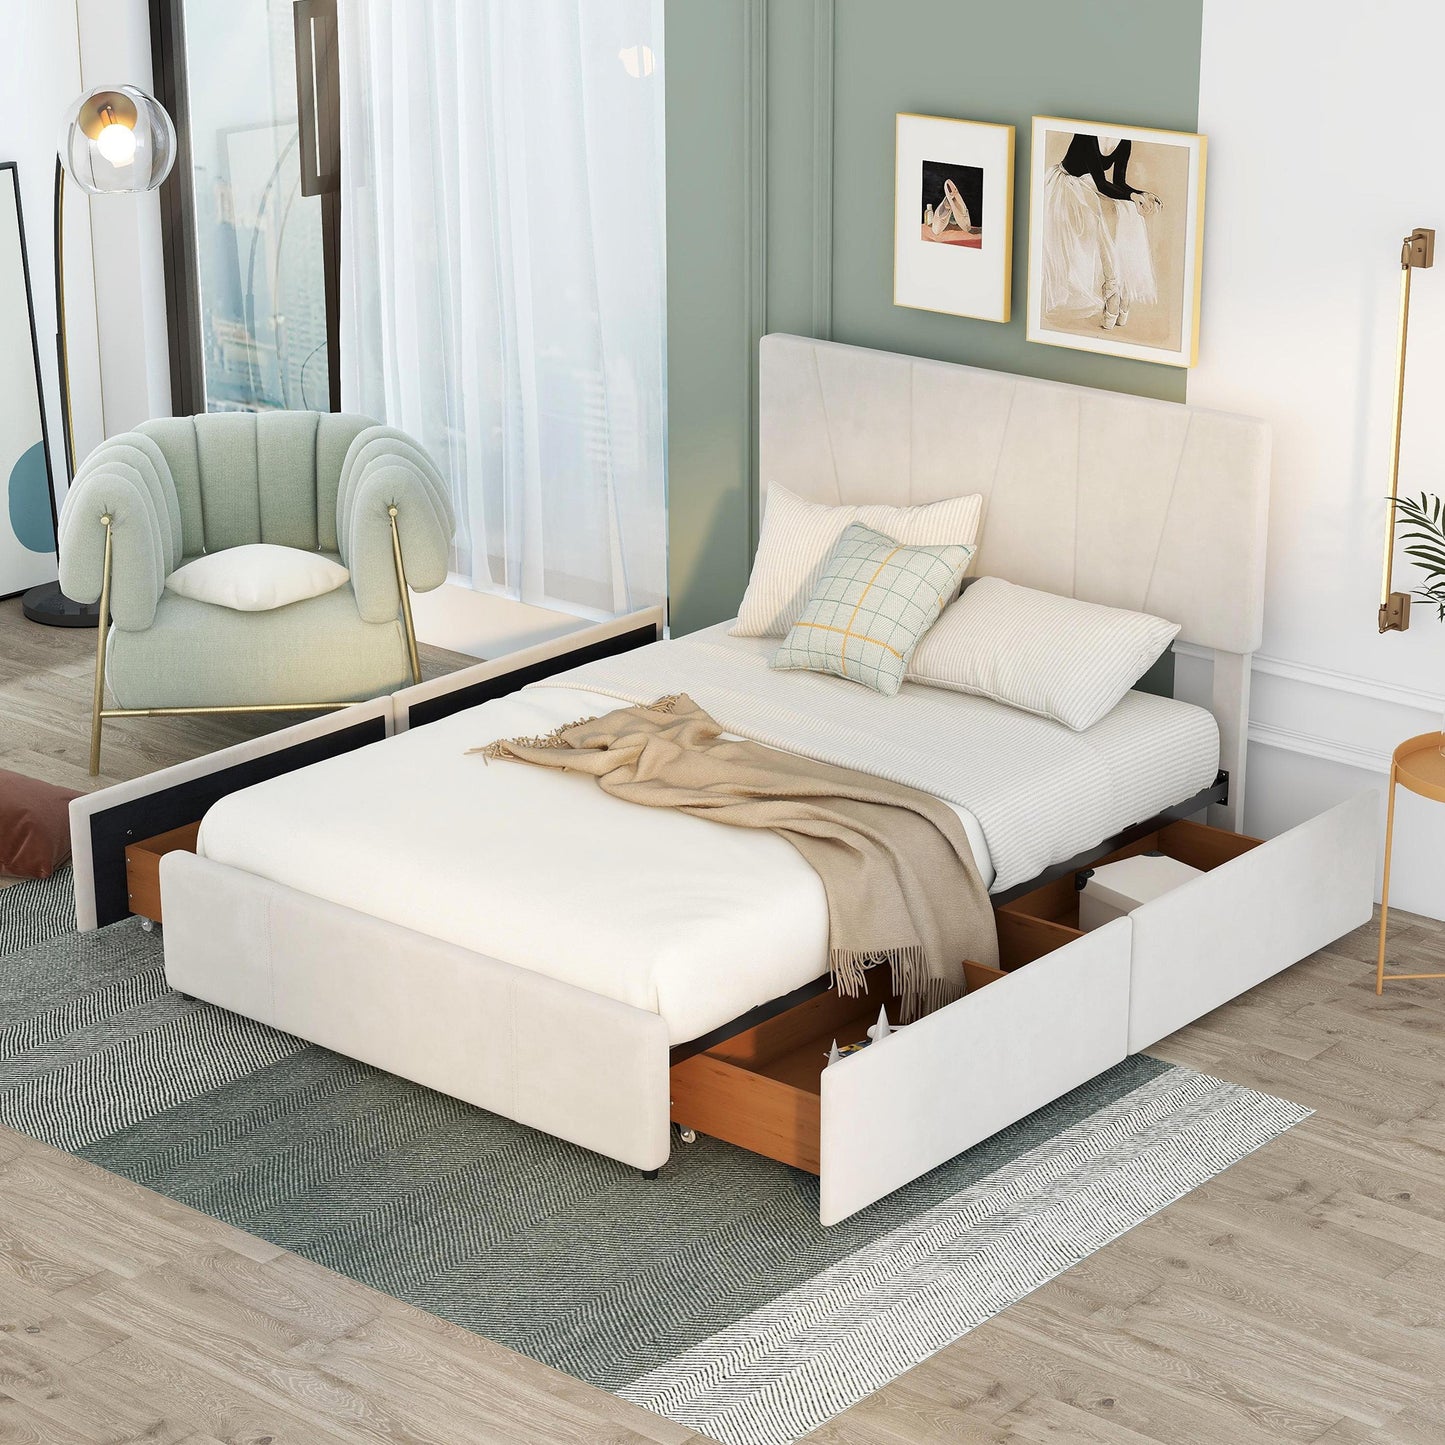 Full Size Upholstery Platform Bed with Four Drawers on Two Sides,Adjustable Headboard,Beige